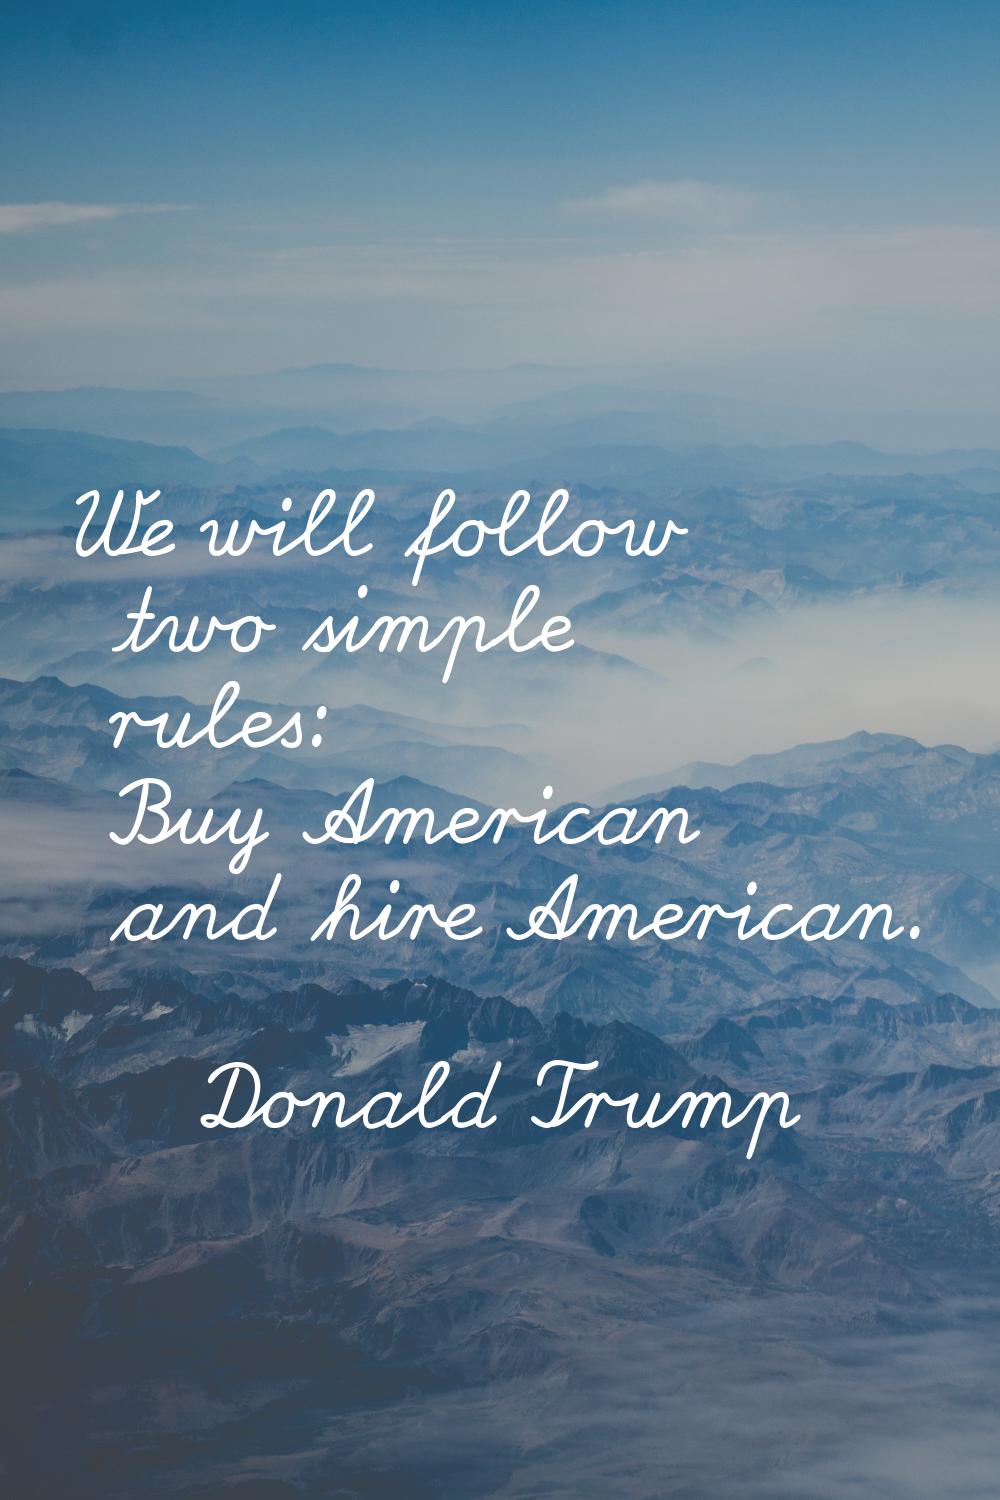 We will follow two simple rules: Buy American and hire American.